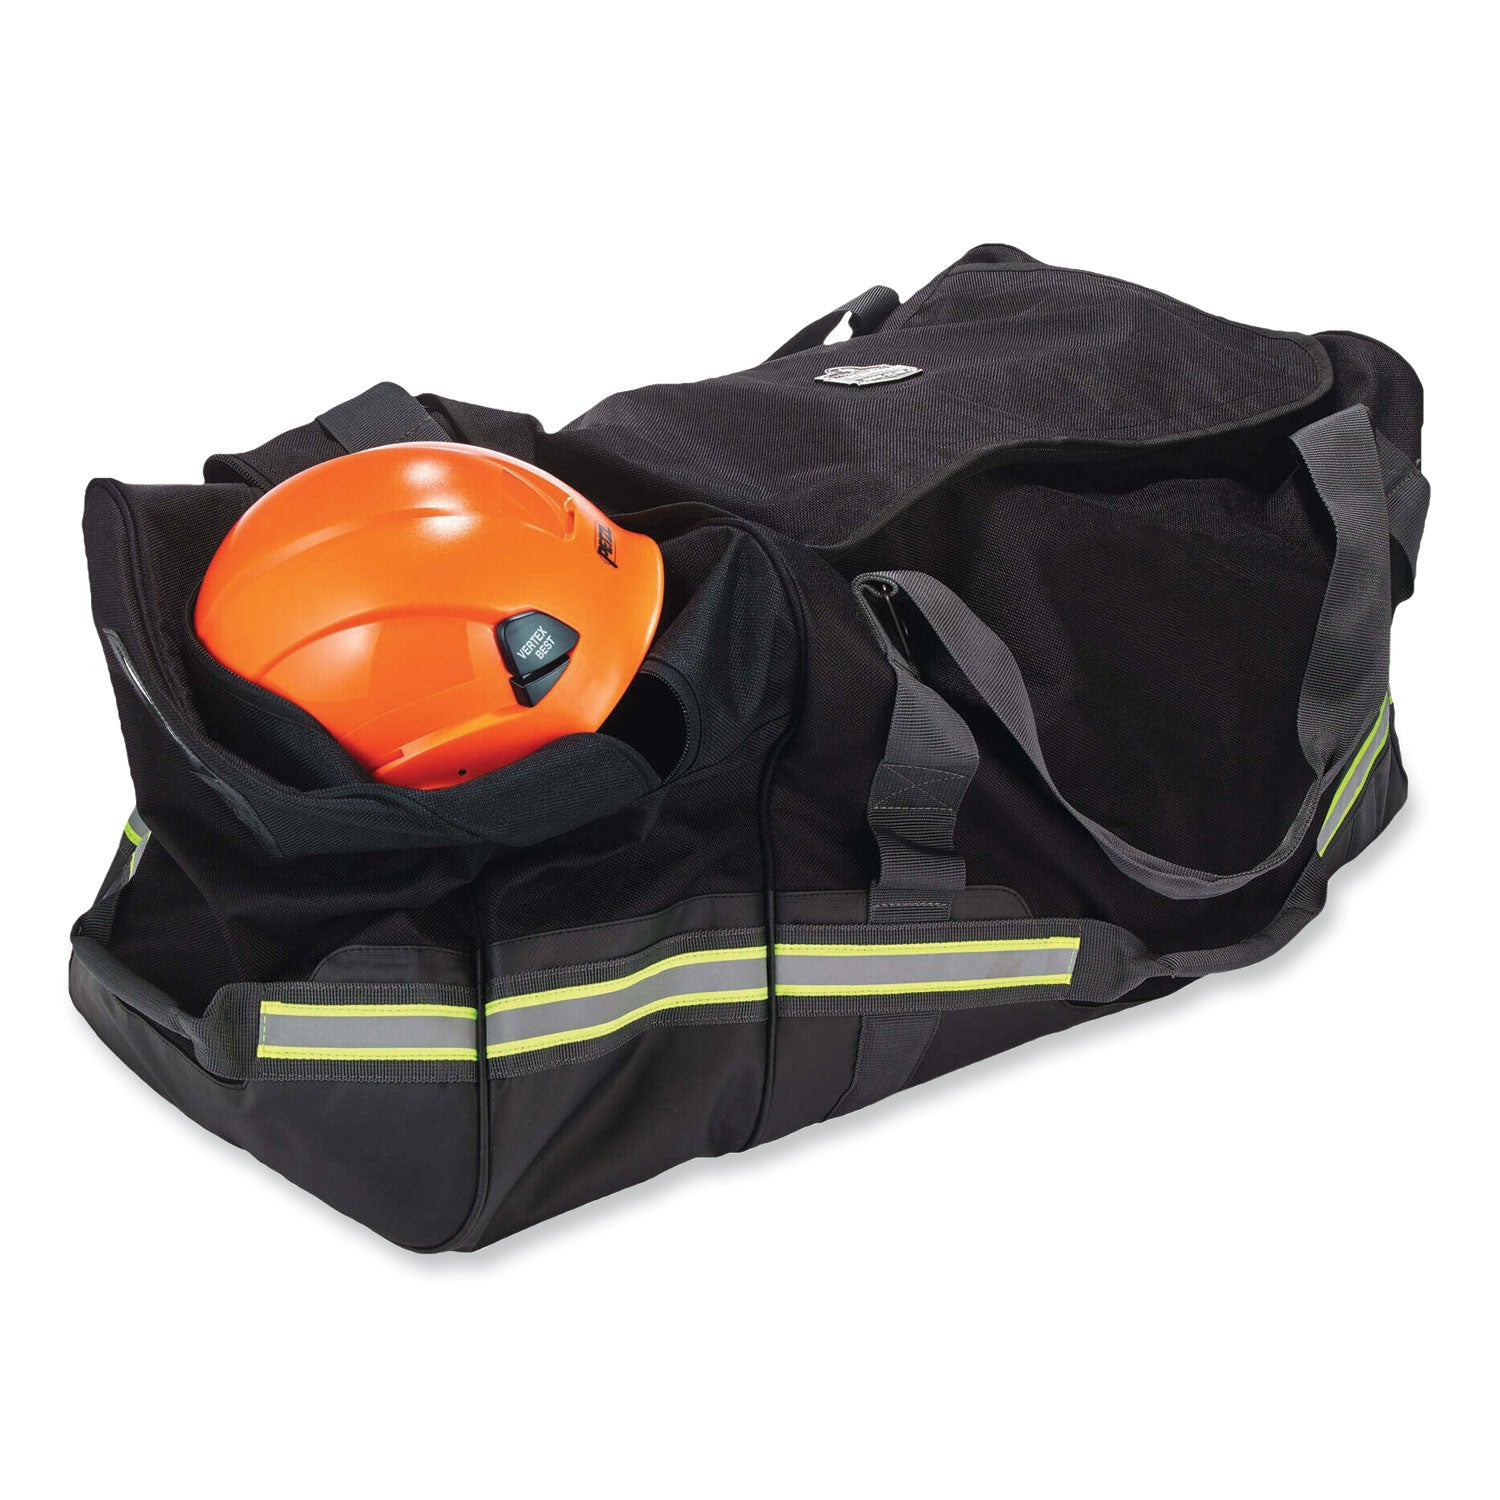 arsenal-5008-fire-+-safety-gear-bag-16-x-31-x-155-black-ships-in-1-3-business-days_ego13009 - 2